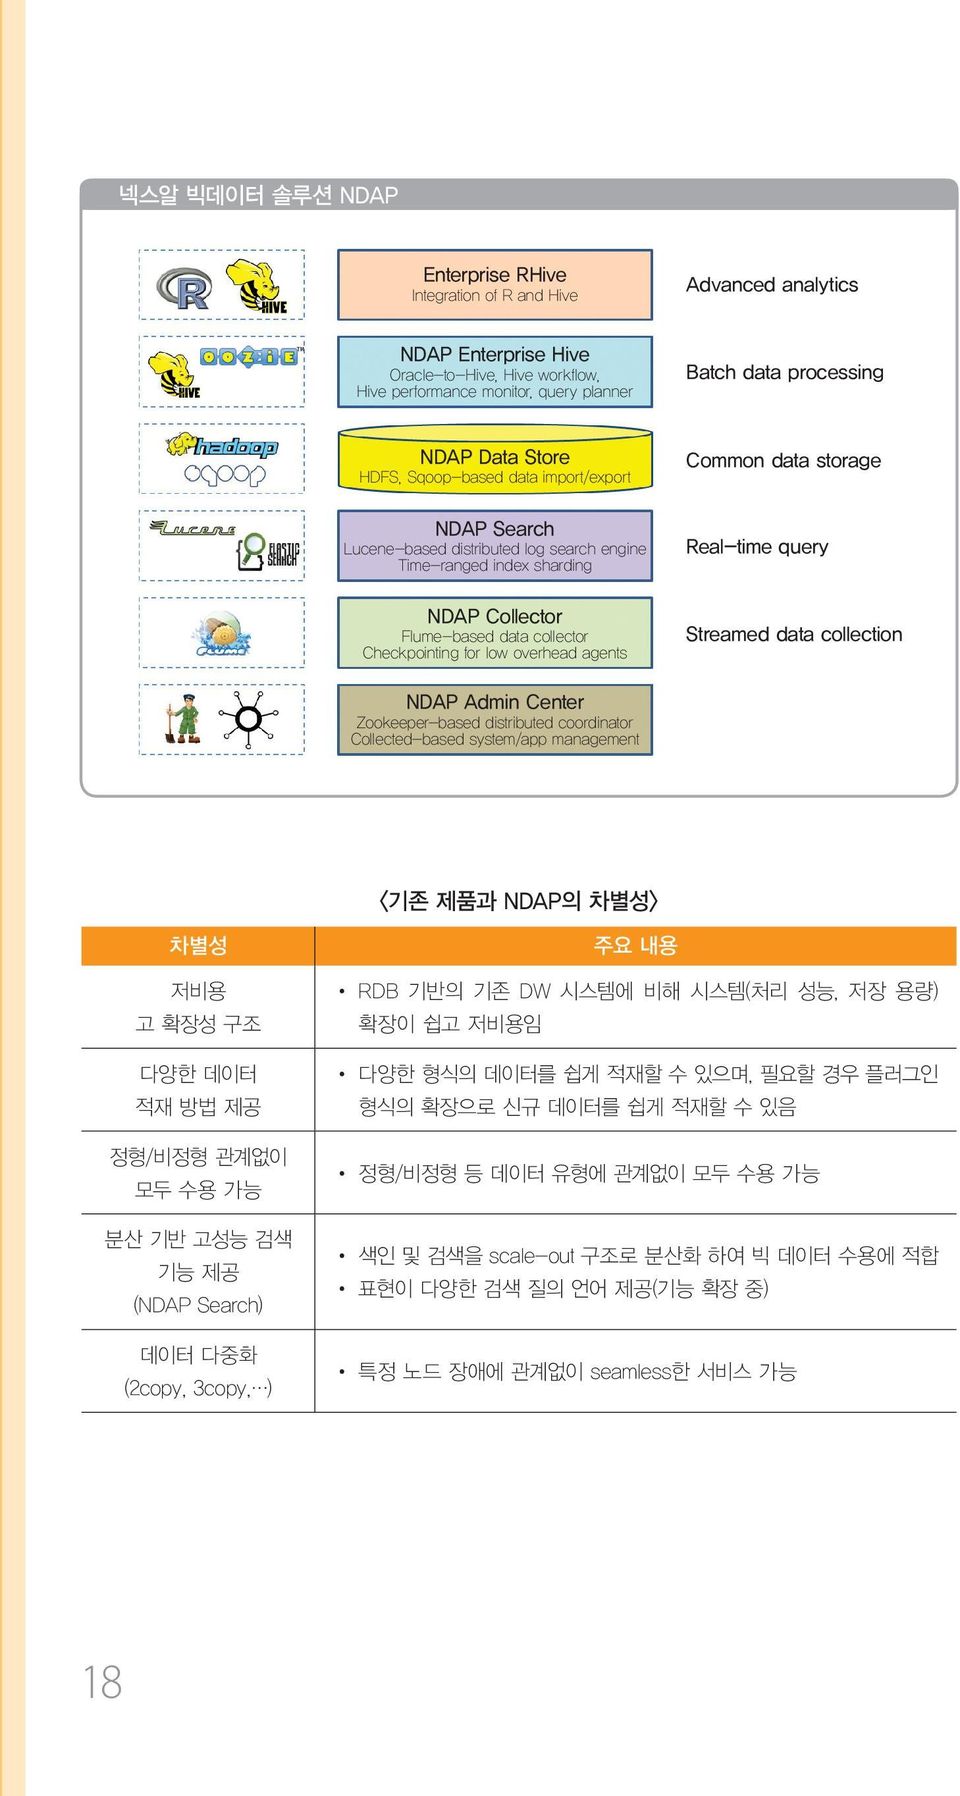 overhead agents Common data storage Real-time query Streamed data collection NDAP Admin Center Zookeeper-based distributed coordinator Collected-based system/app management <기존 제품과 NDAP의 차별성> 차별성 저비용